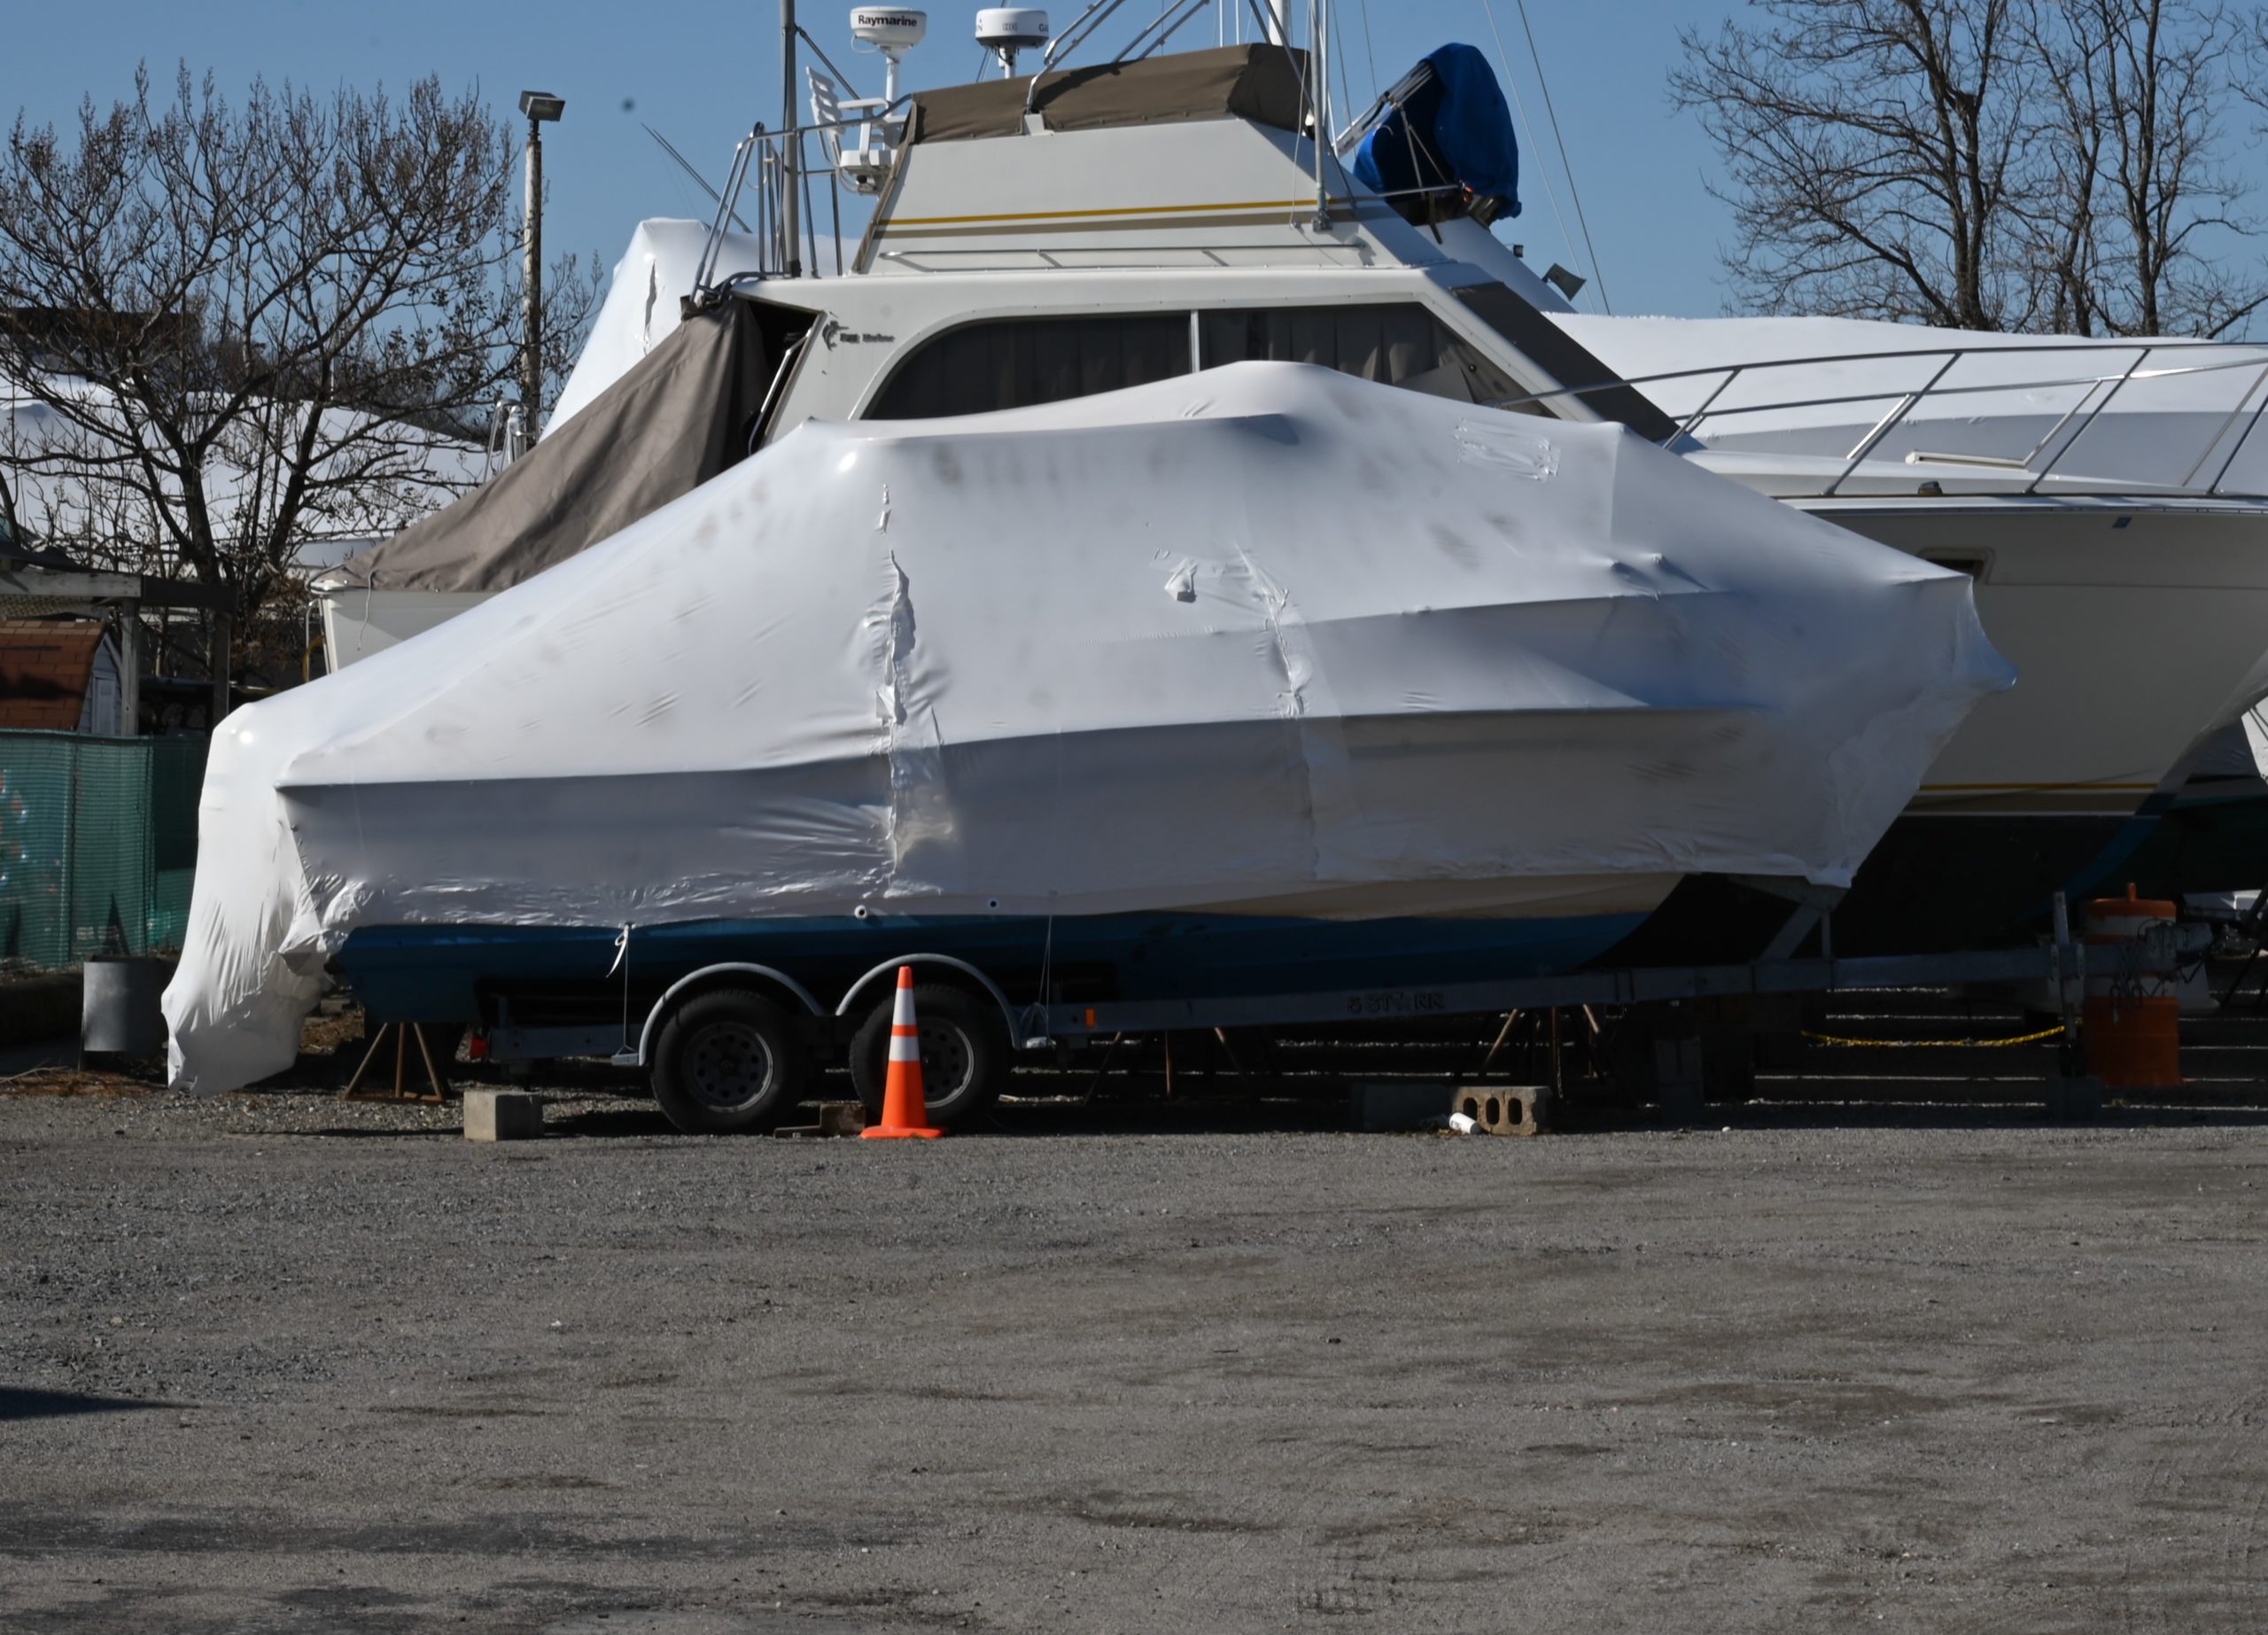 How To Winterize A Boat How To Winterize Your Boat - The Fisherman